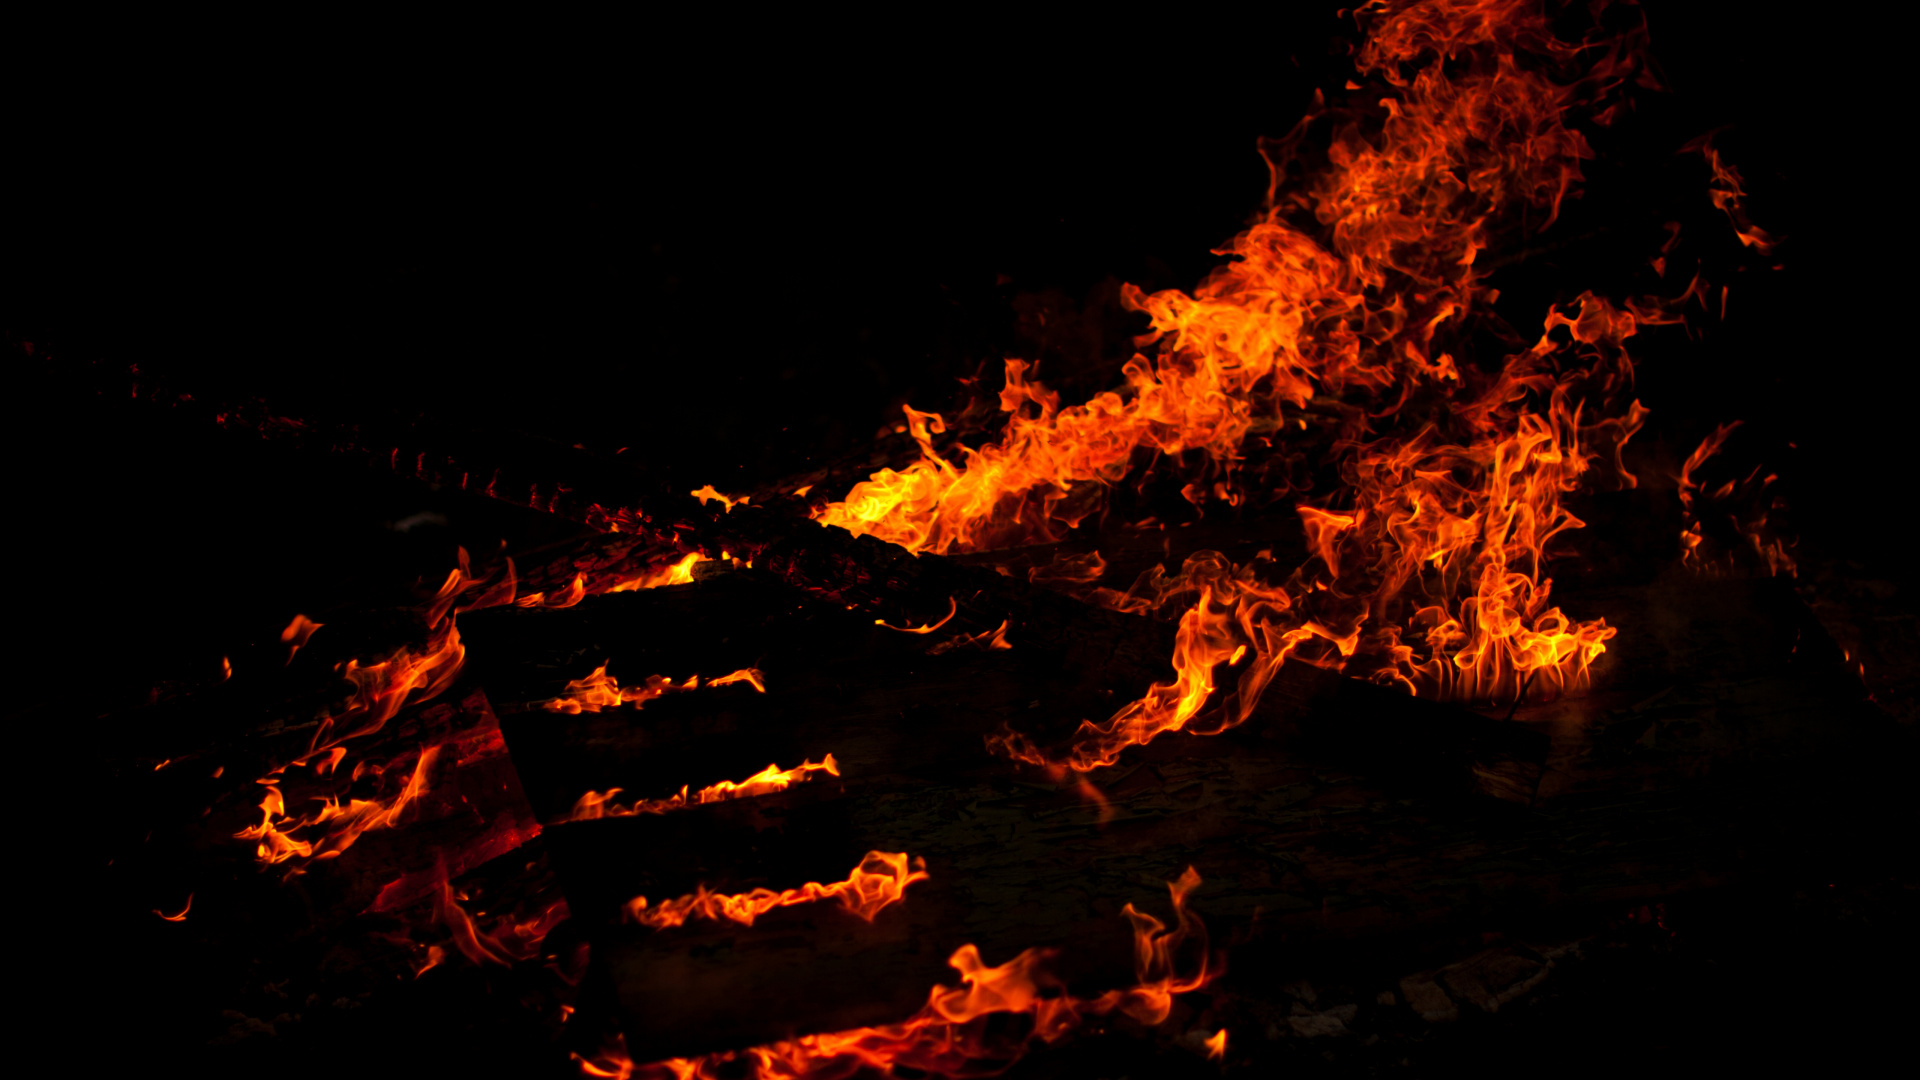 Fire on Fire During Night Time. Wallpaper in 1920x1080 Resolution